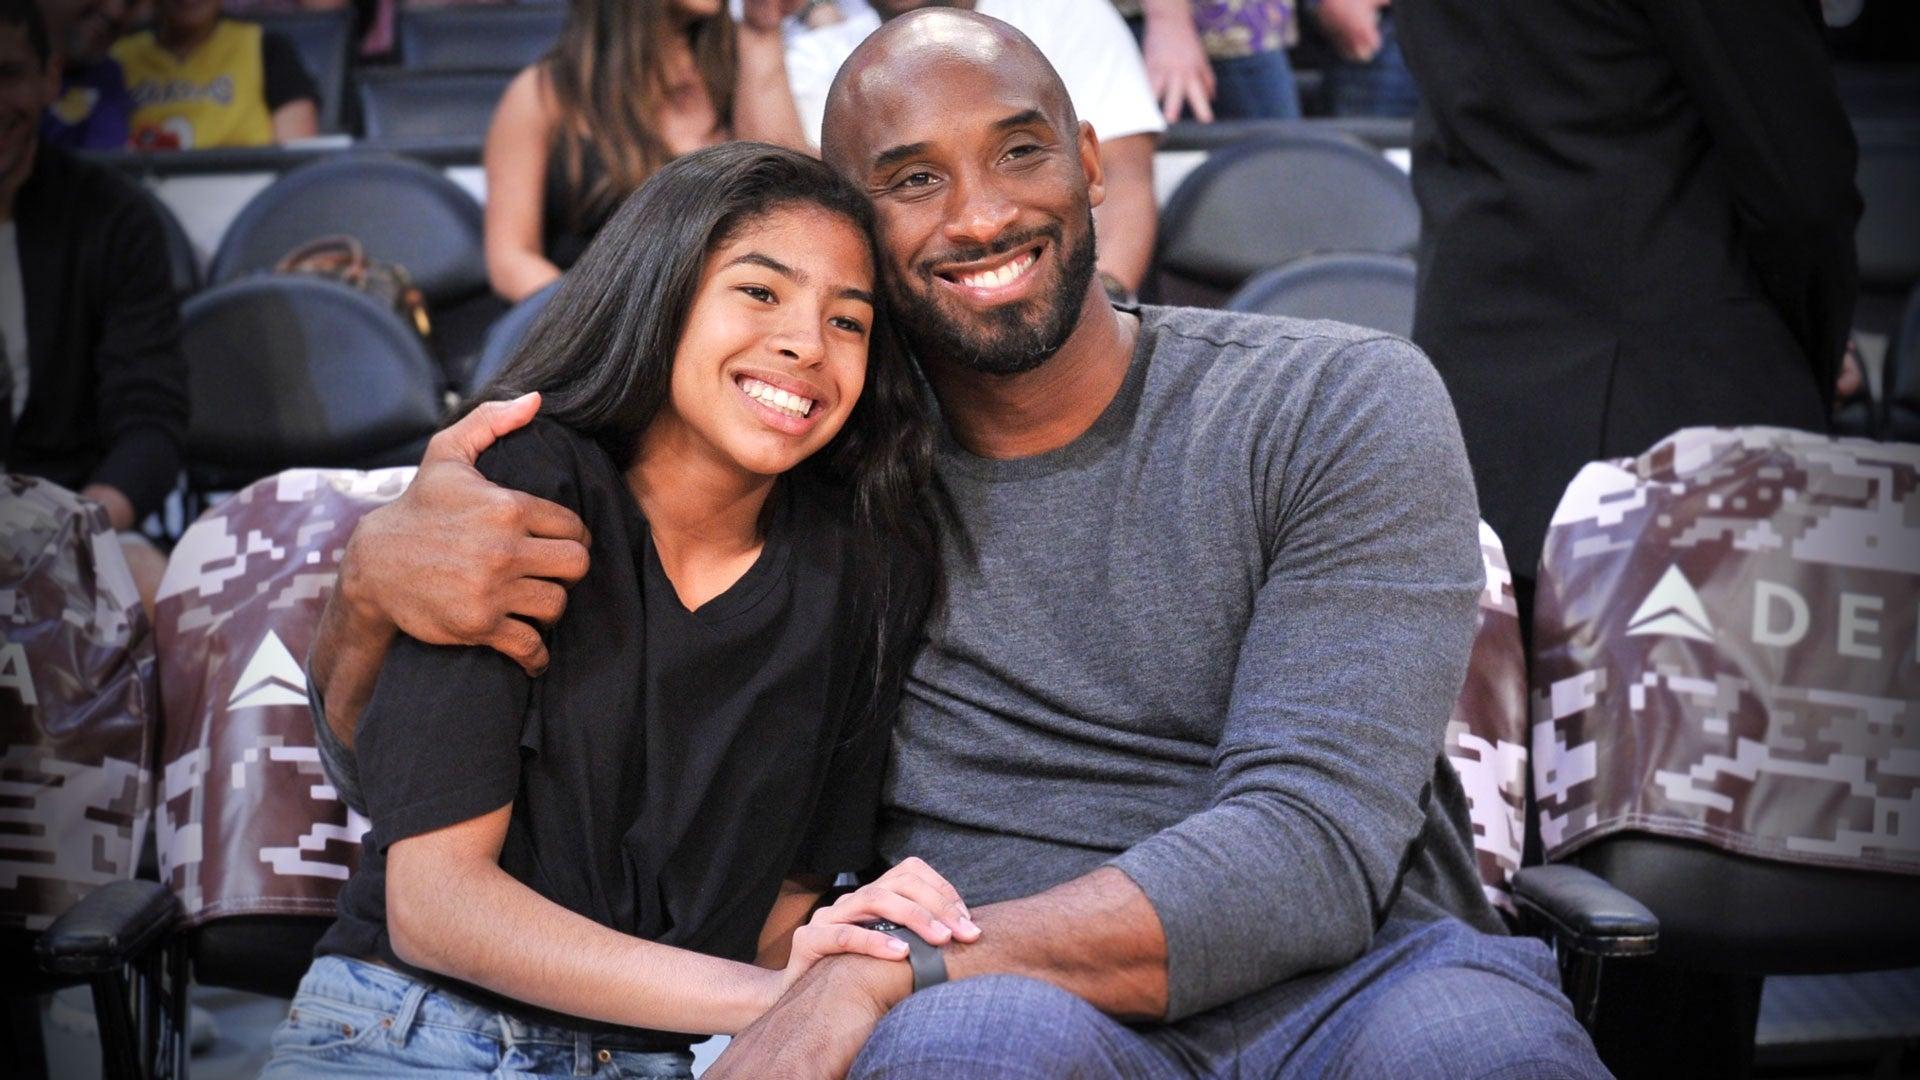 Kobe Bryant's Daughter Gianna Dies in Helicopter Crash With